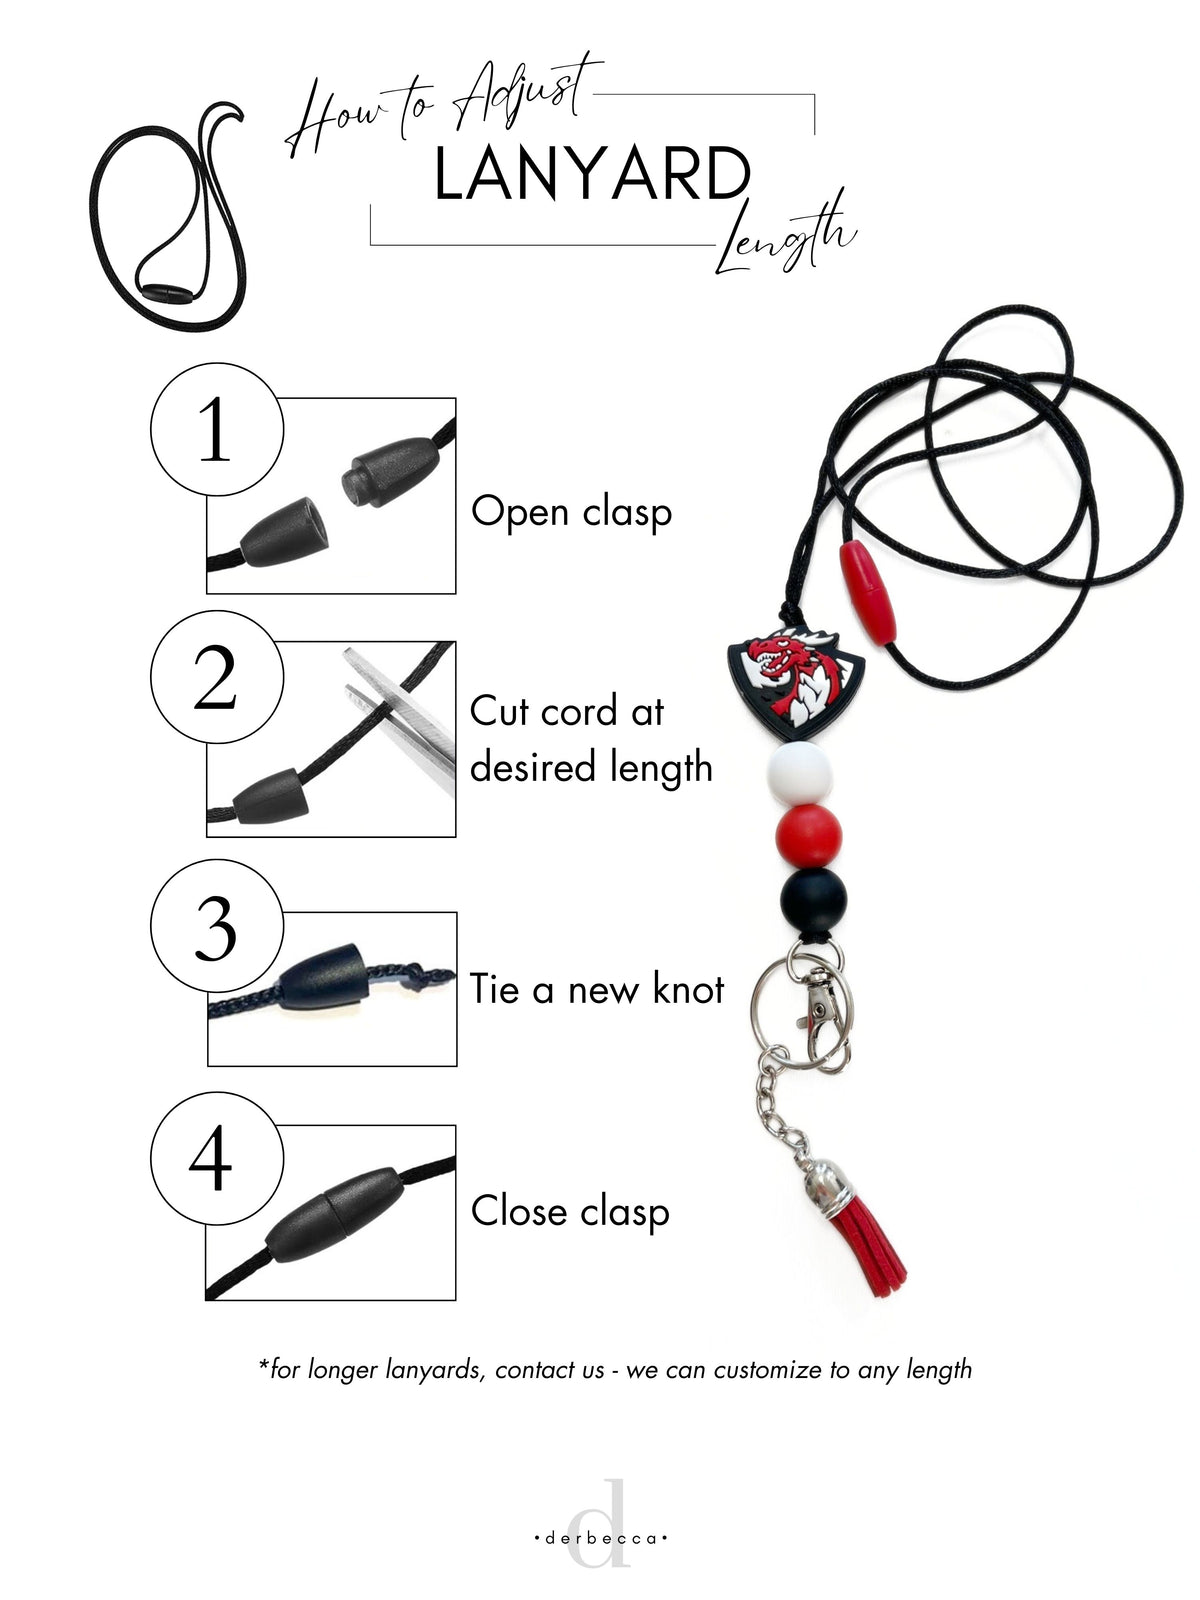 How to Adjust Lanyard Length: Open Clasp, Cut cord at desired length, Tie a new knit, Close Clasp. Shorten Nylon Lanyard Length with scissors 